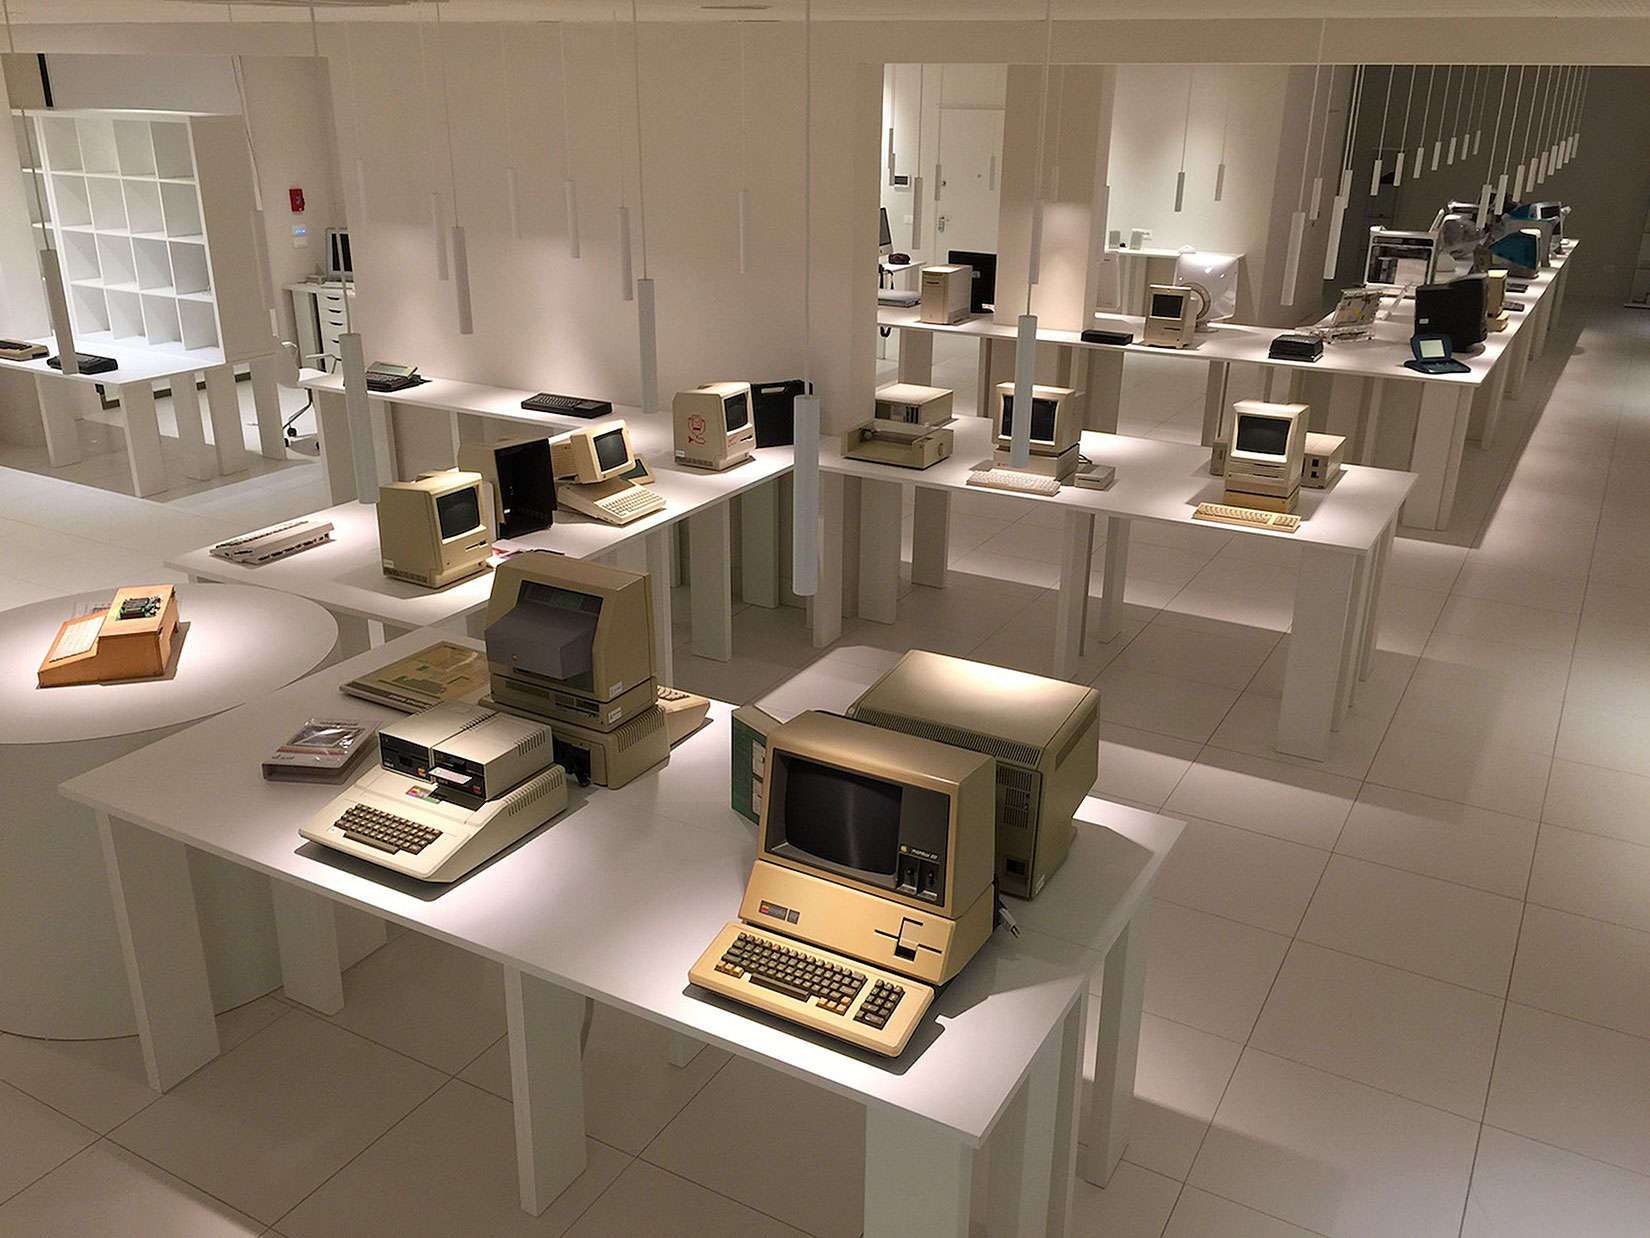 The All About Apple Museum in Savona, Italy.